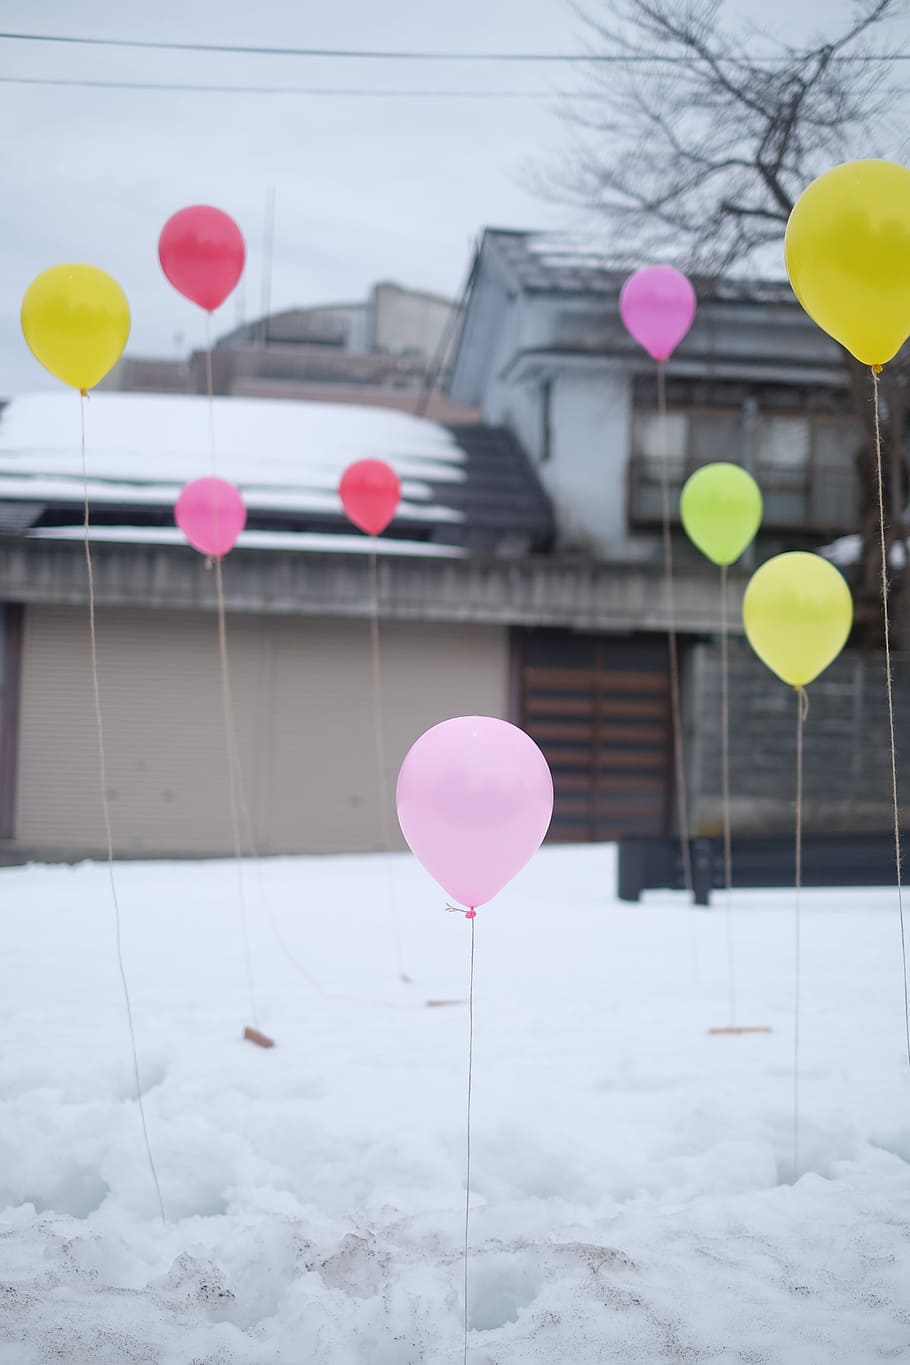 balloons, party, snow, driveway, house, winter, cold, home, birthday, balloon